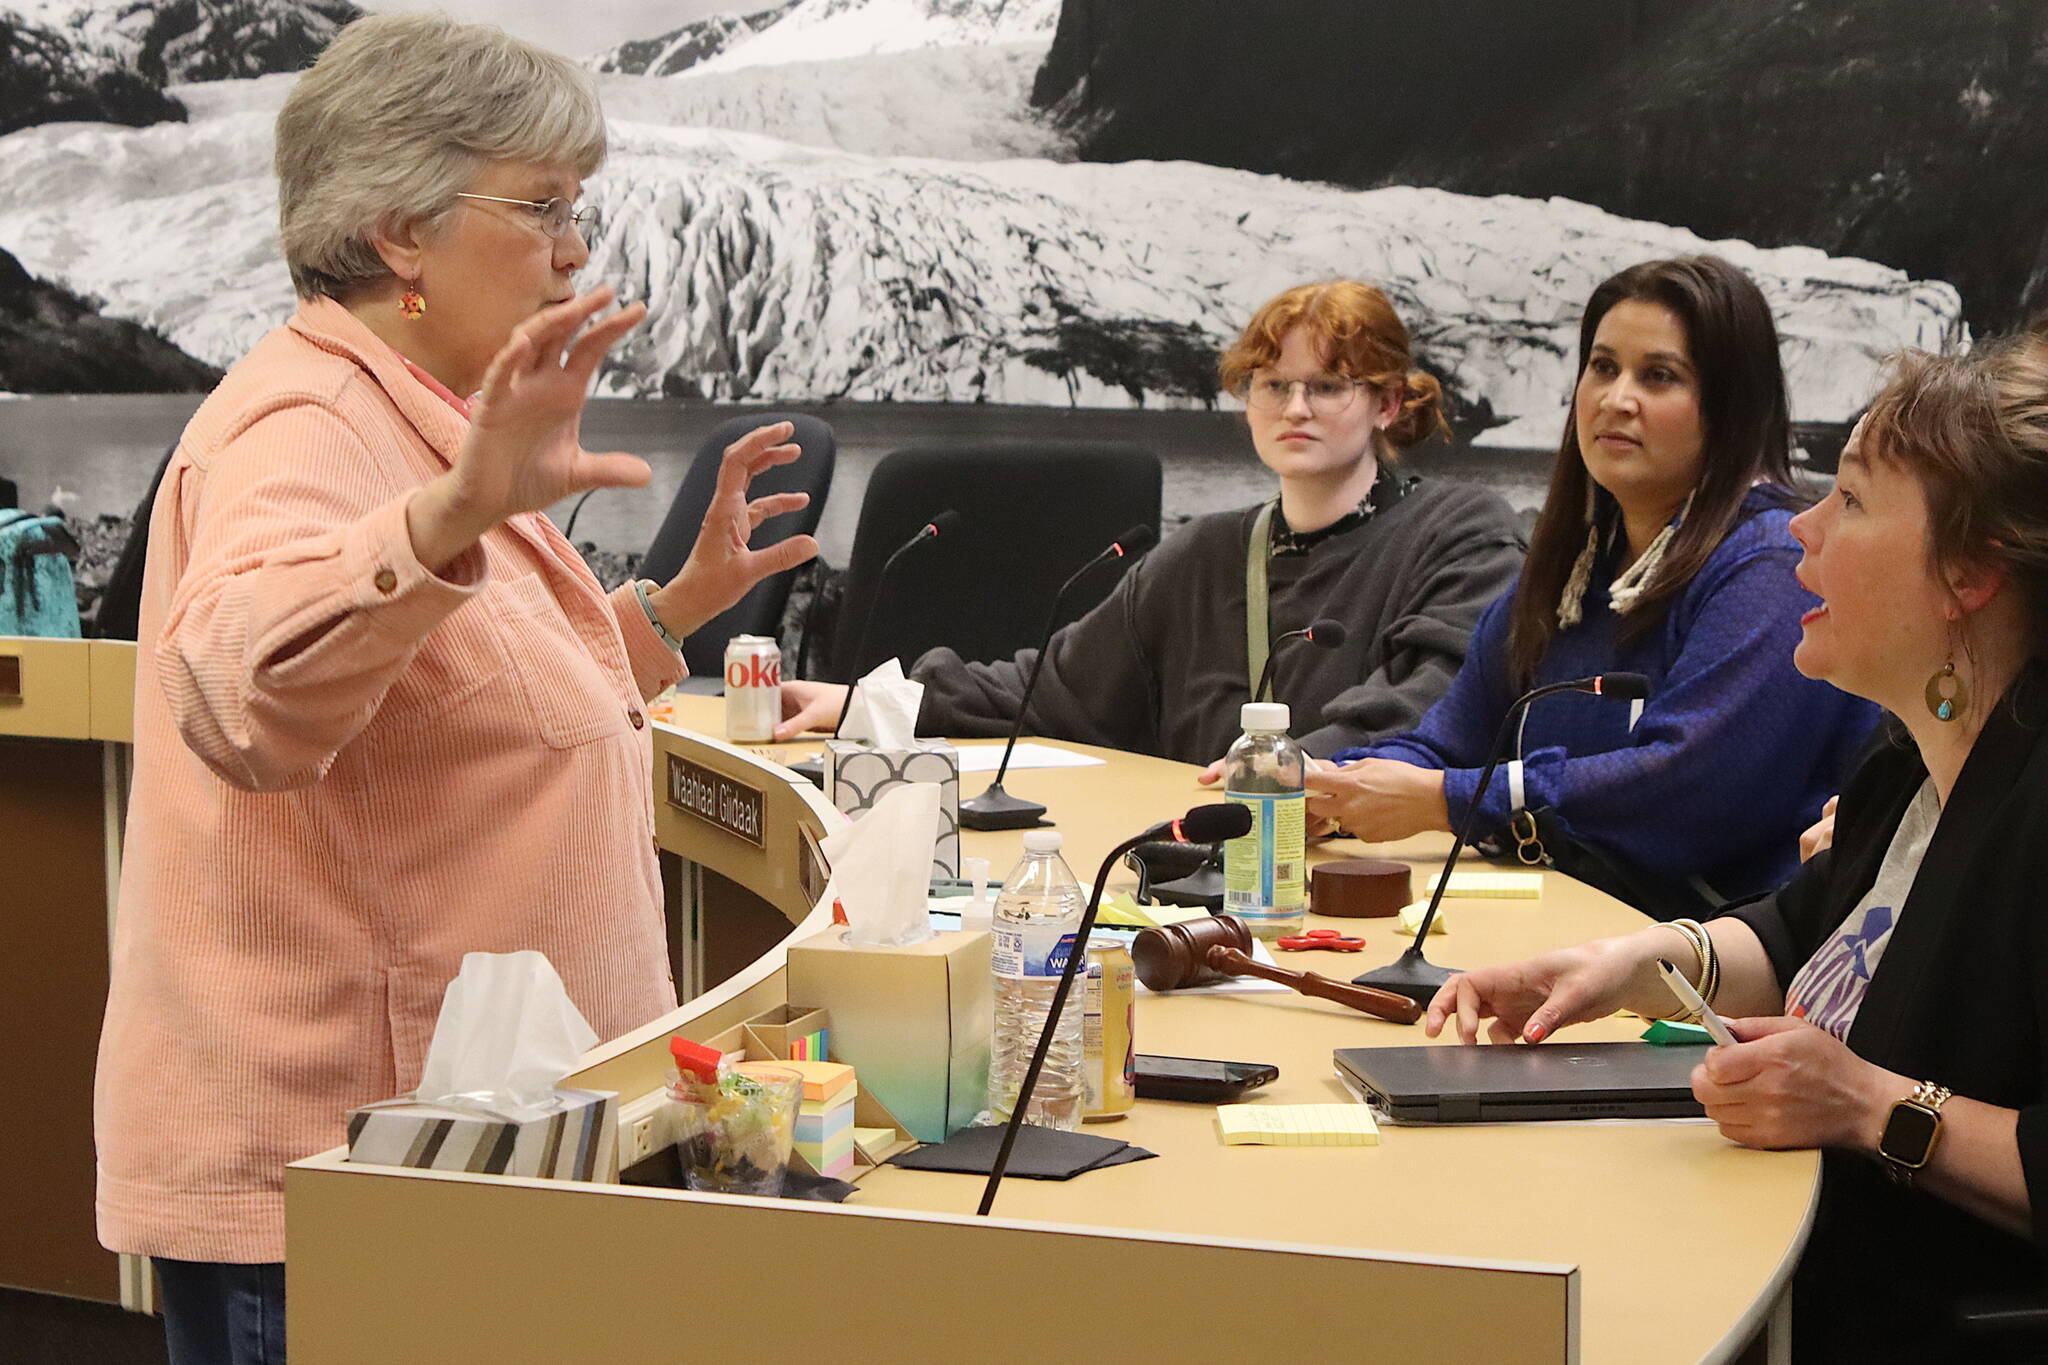 Deputy Mayor Michelle Bonnet Hale (left) talks with Assembly members (from right to left) Alicia Hughes-Skandijs, Wáahlaal Gíidaak Barbara Blake and Ella Adkison following an Assembly Finance Committee meeting Wednesday night. Hale and Blake, whose terms expire this fall, say they are not seeking reelection. (Mark Sabbatini / Juneau Empire)